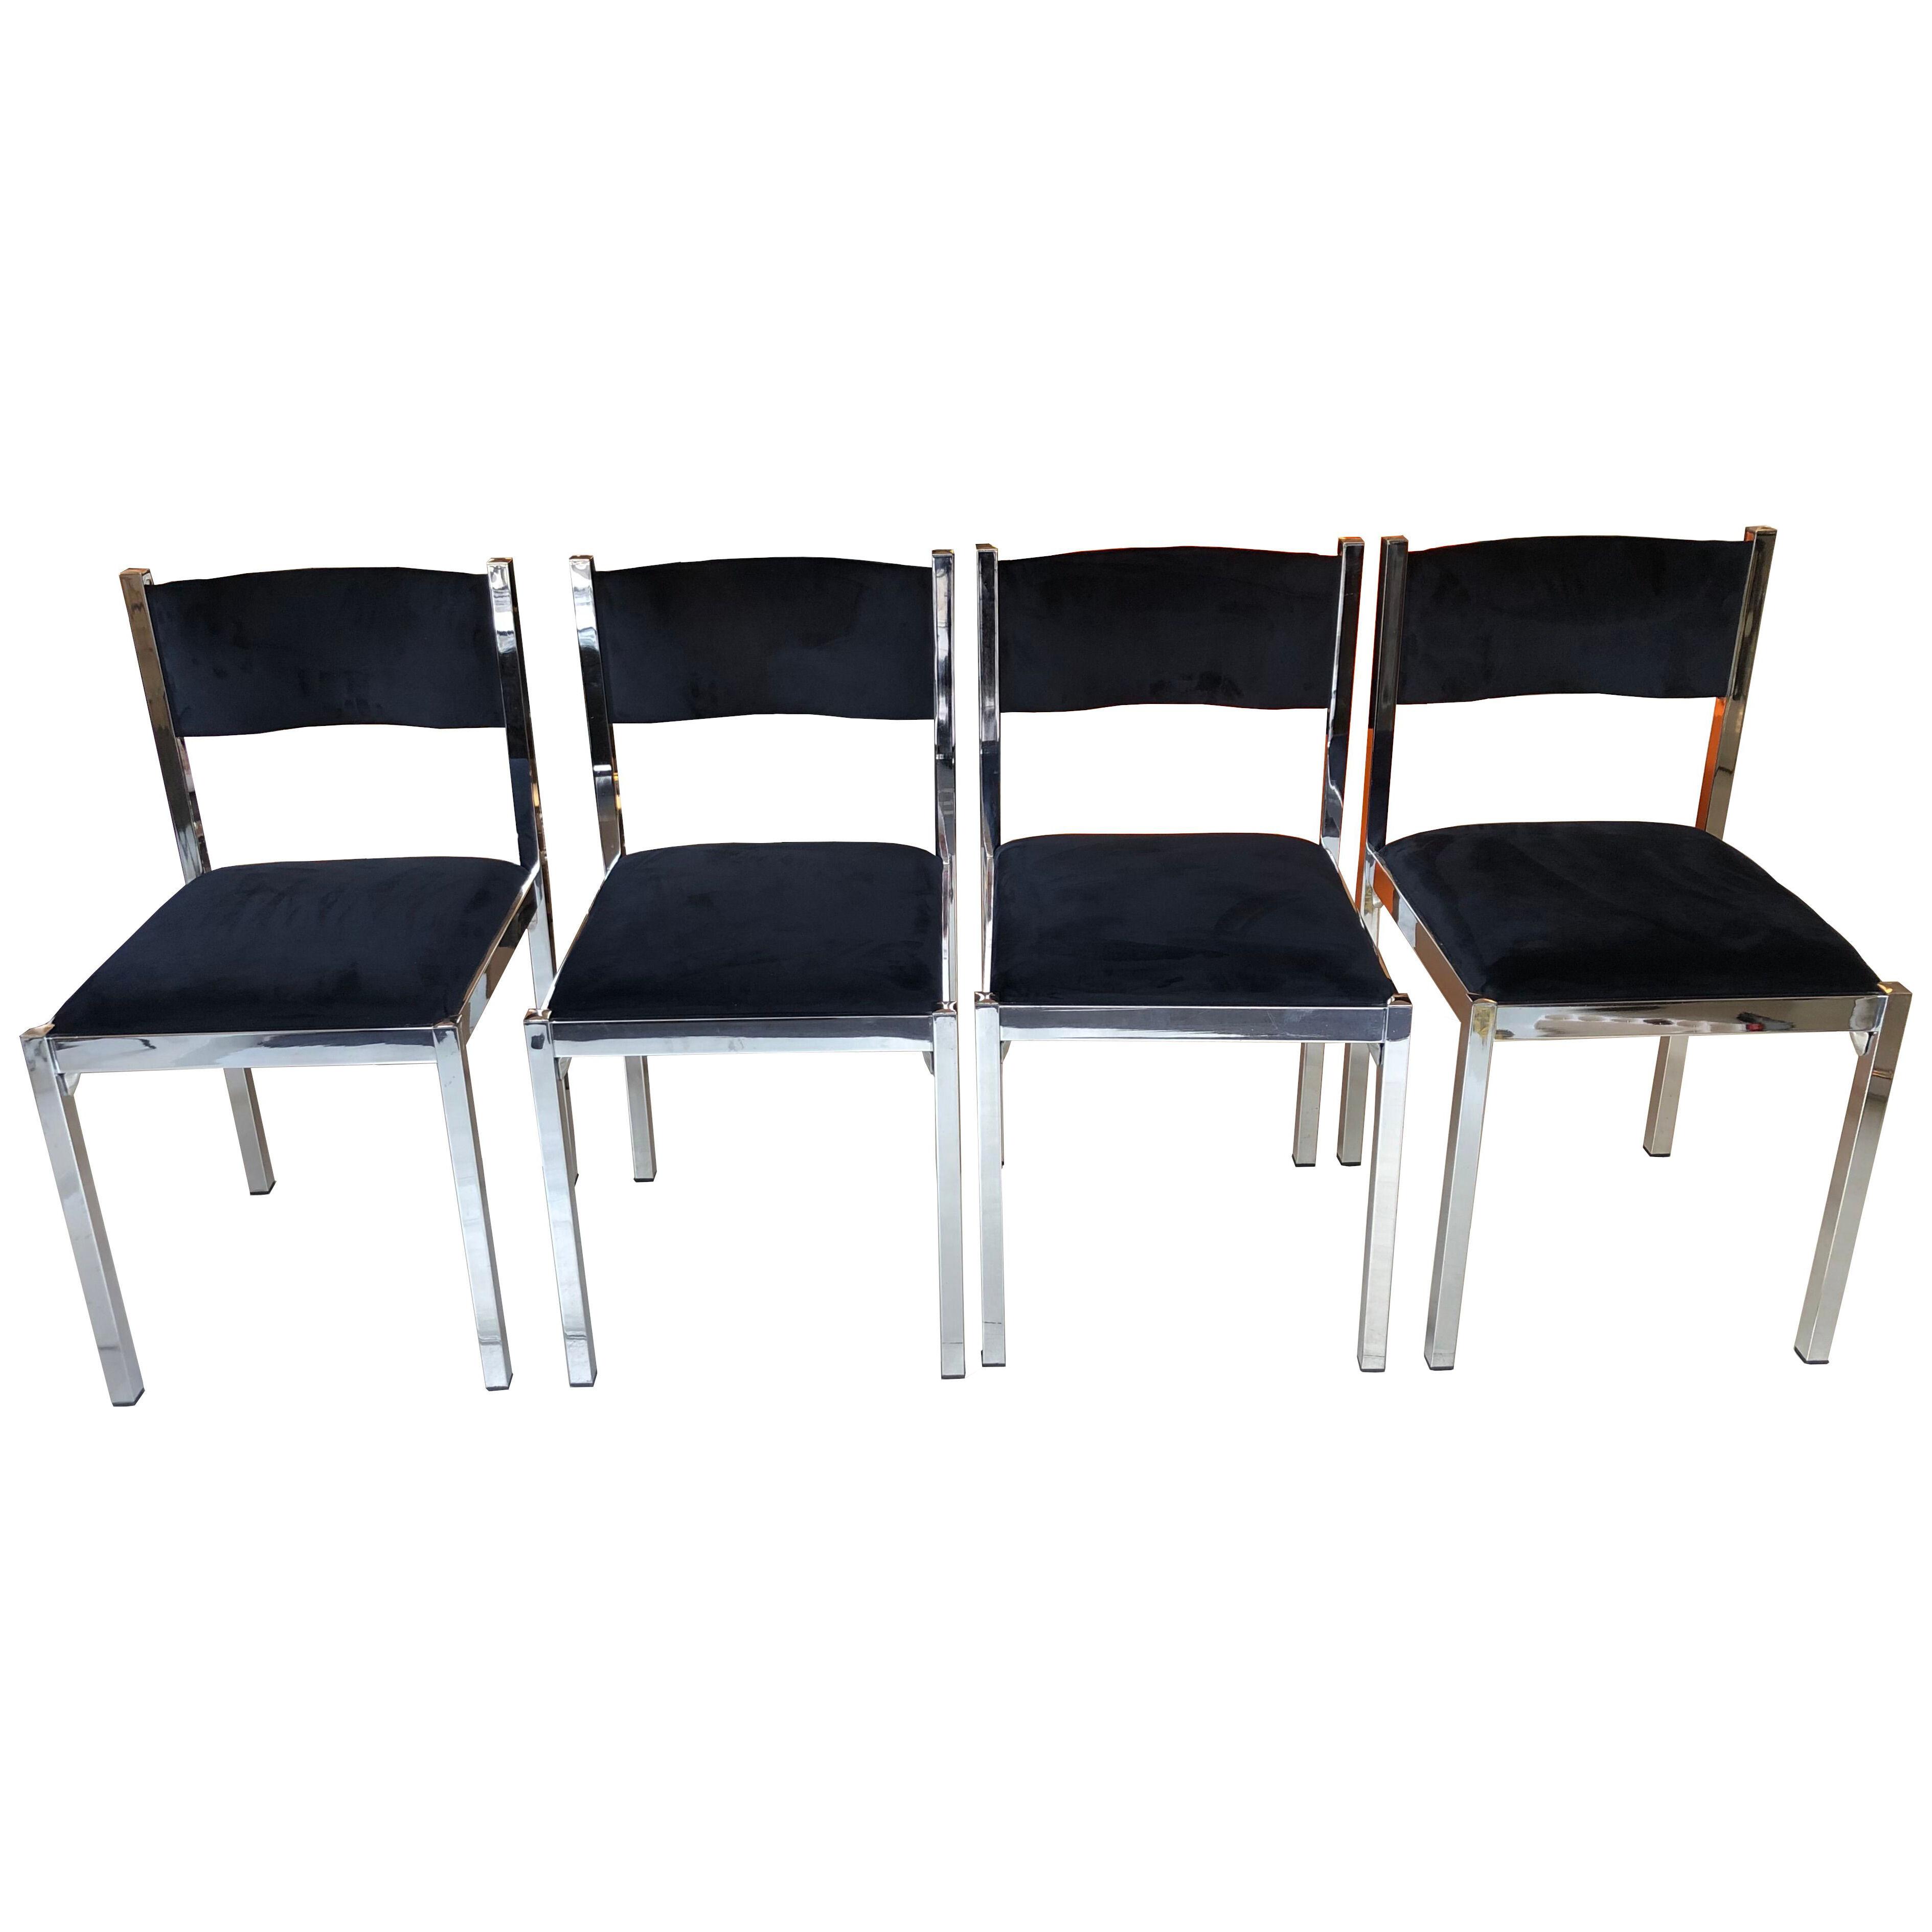 Set of 4 chrome and suede chairs, circa 1970